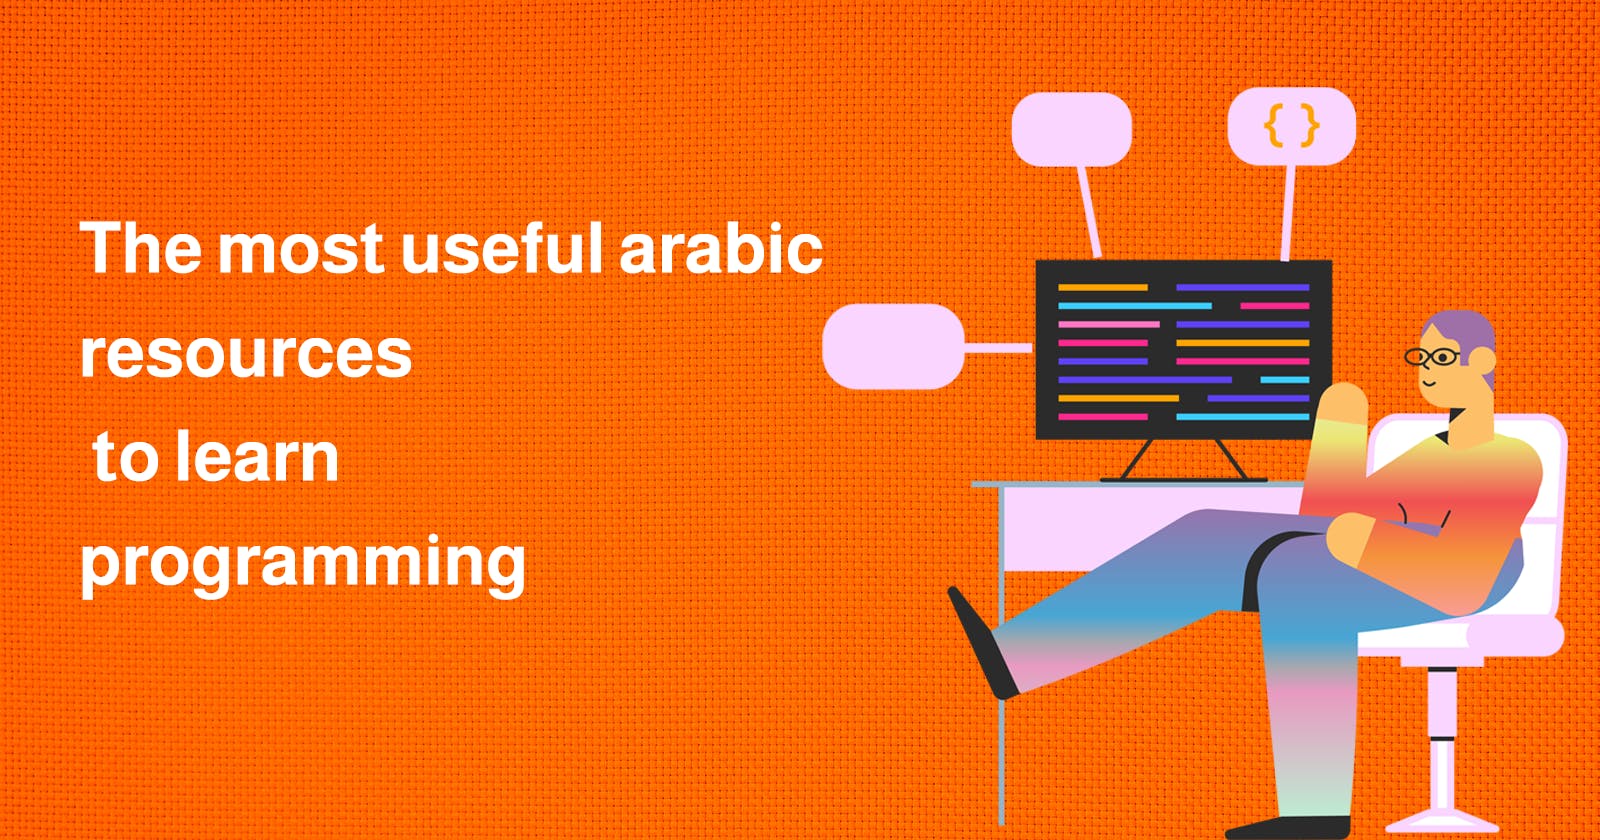 The most useful Arabic resources to learn programming 👌